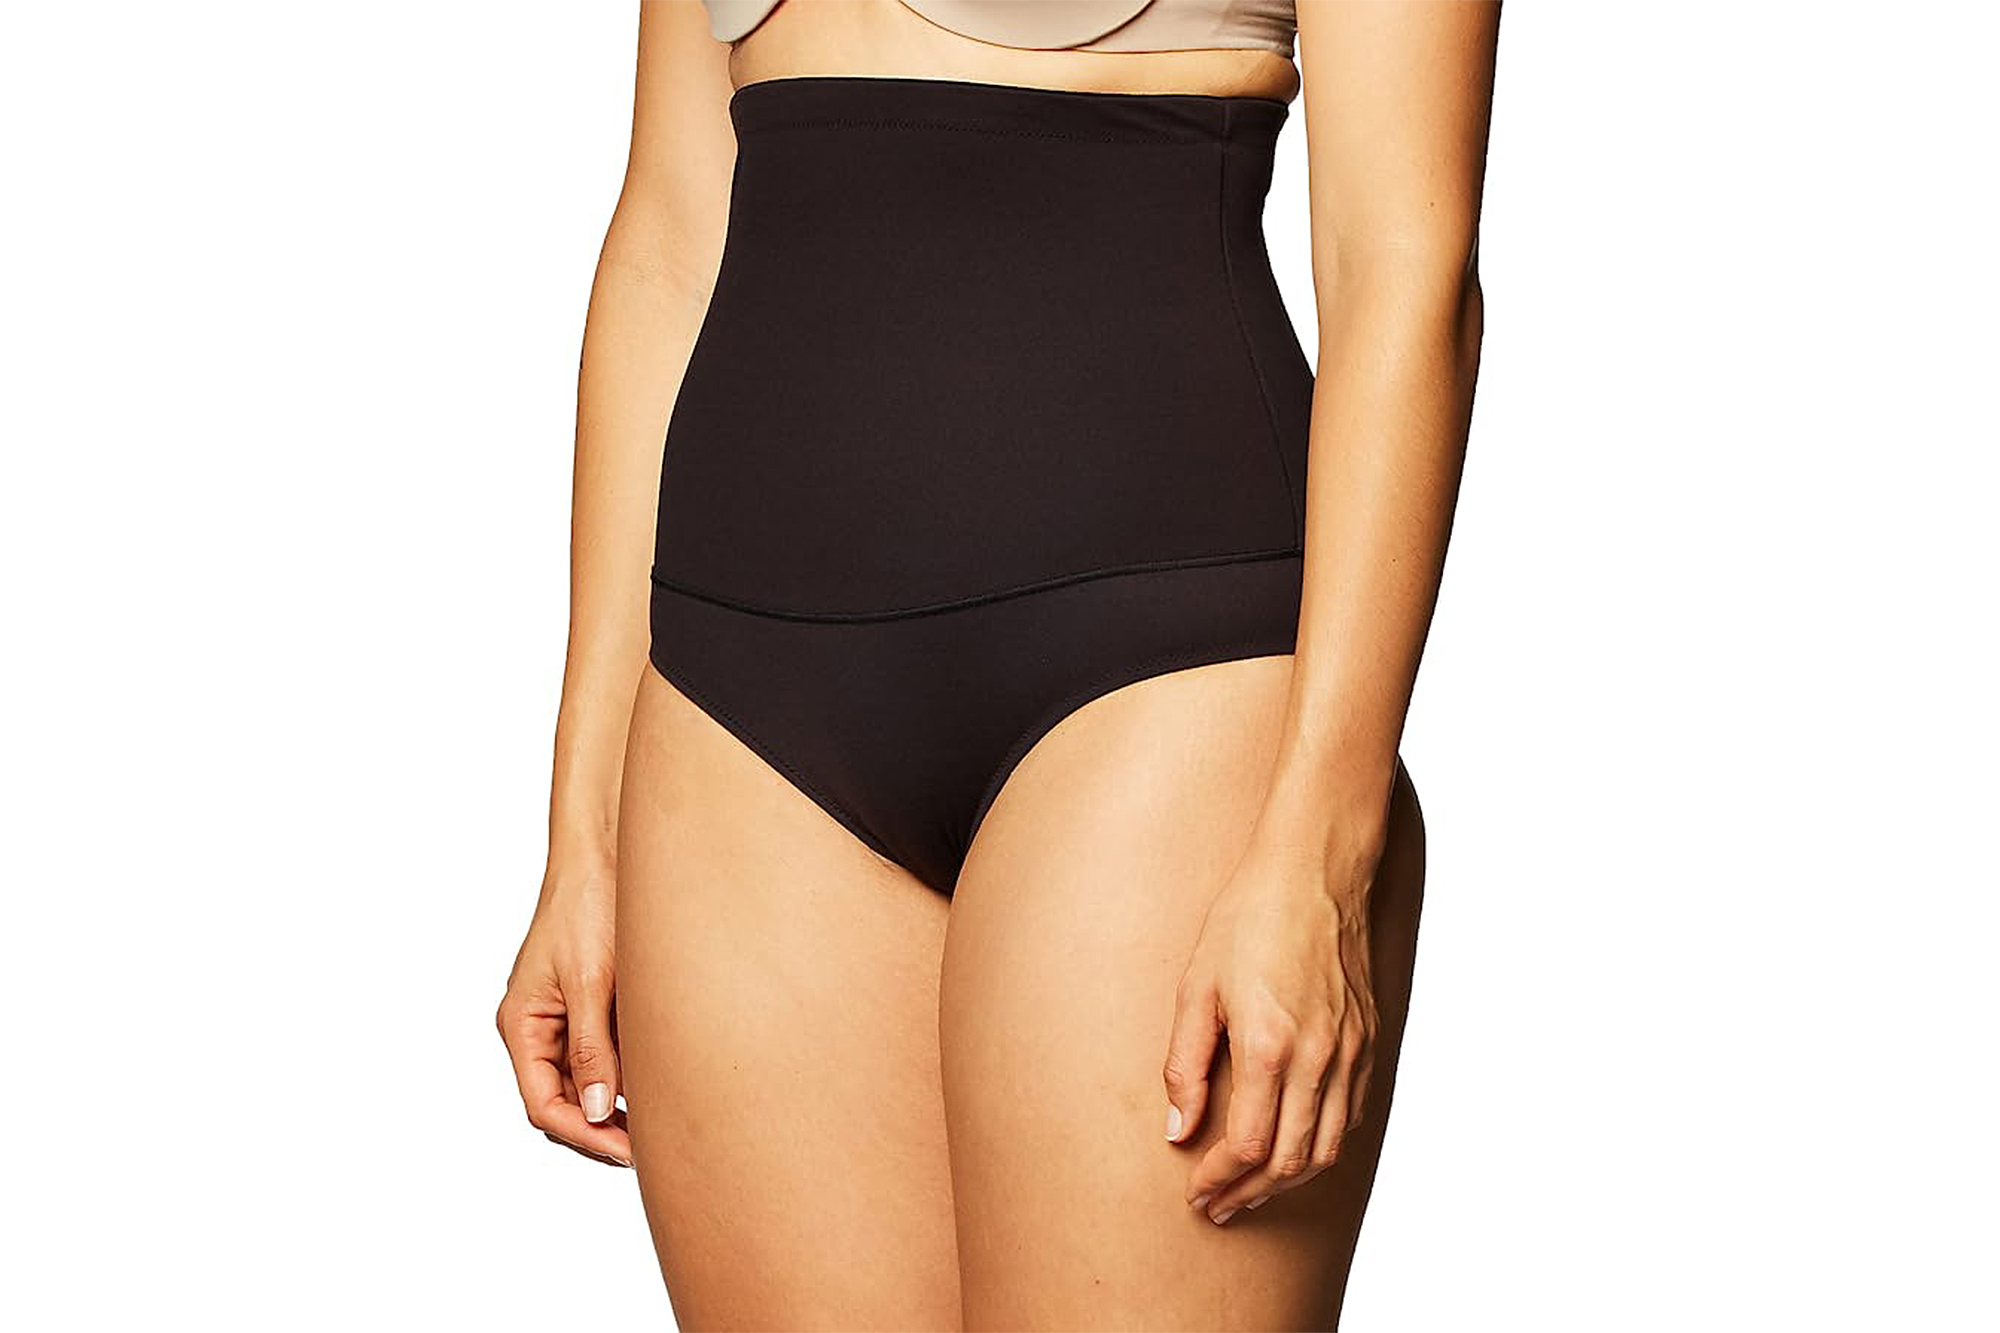 Early Prime Day Deals: The Best Tummy-Control Underwear